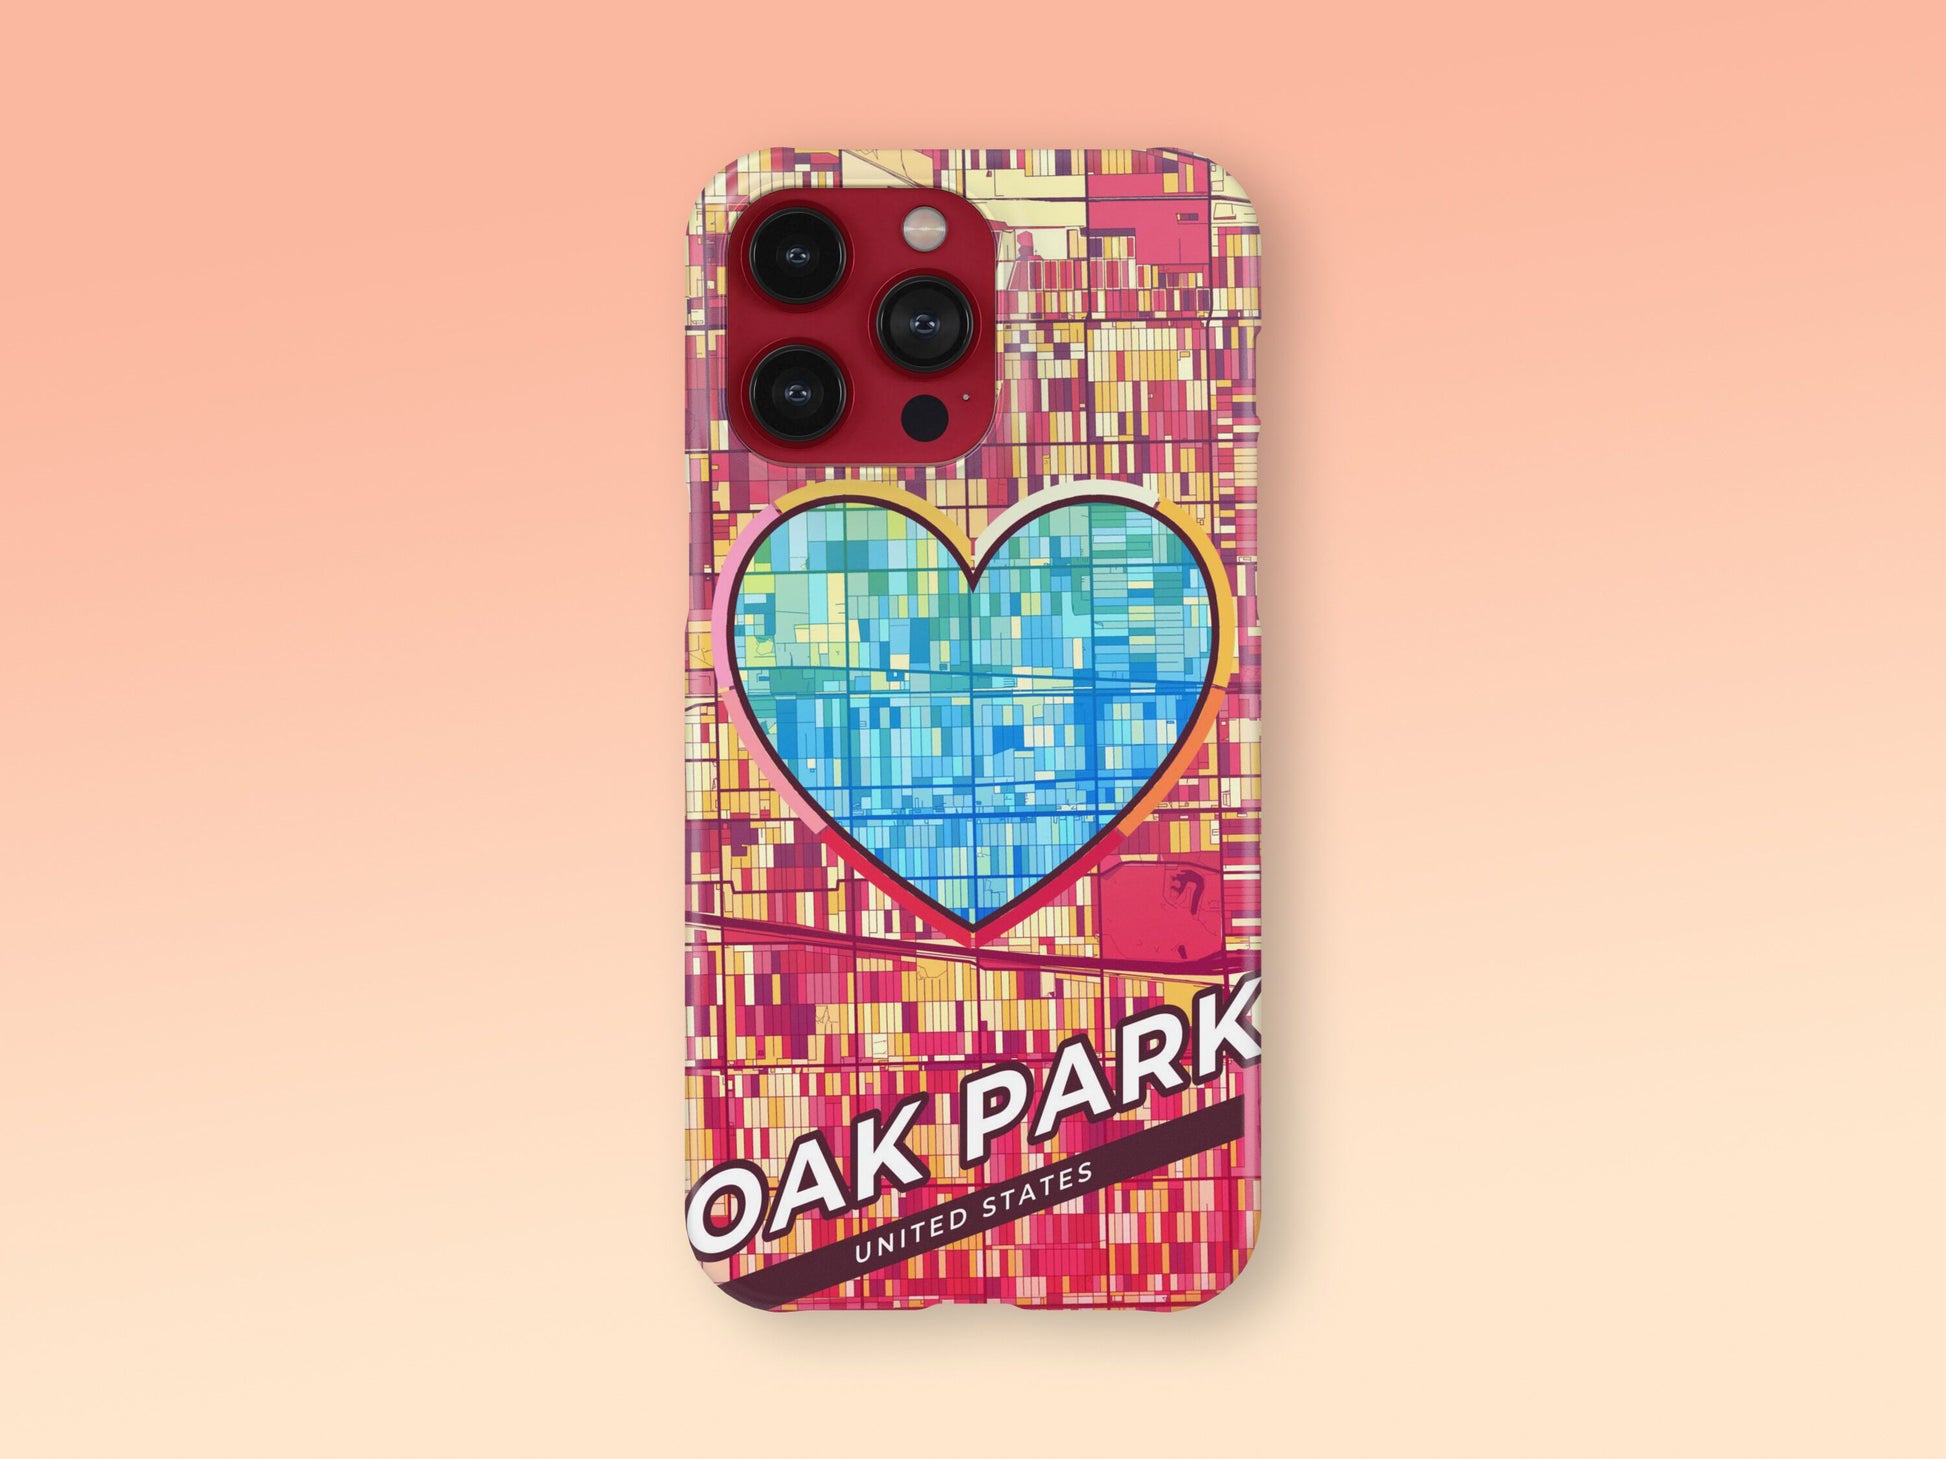 Oak Park Illinois slim phone case with colorful icon. Birthday, wedding or housewarming gift. Couple match cases. 2